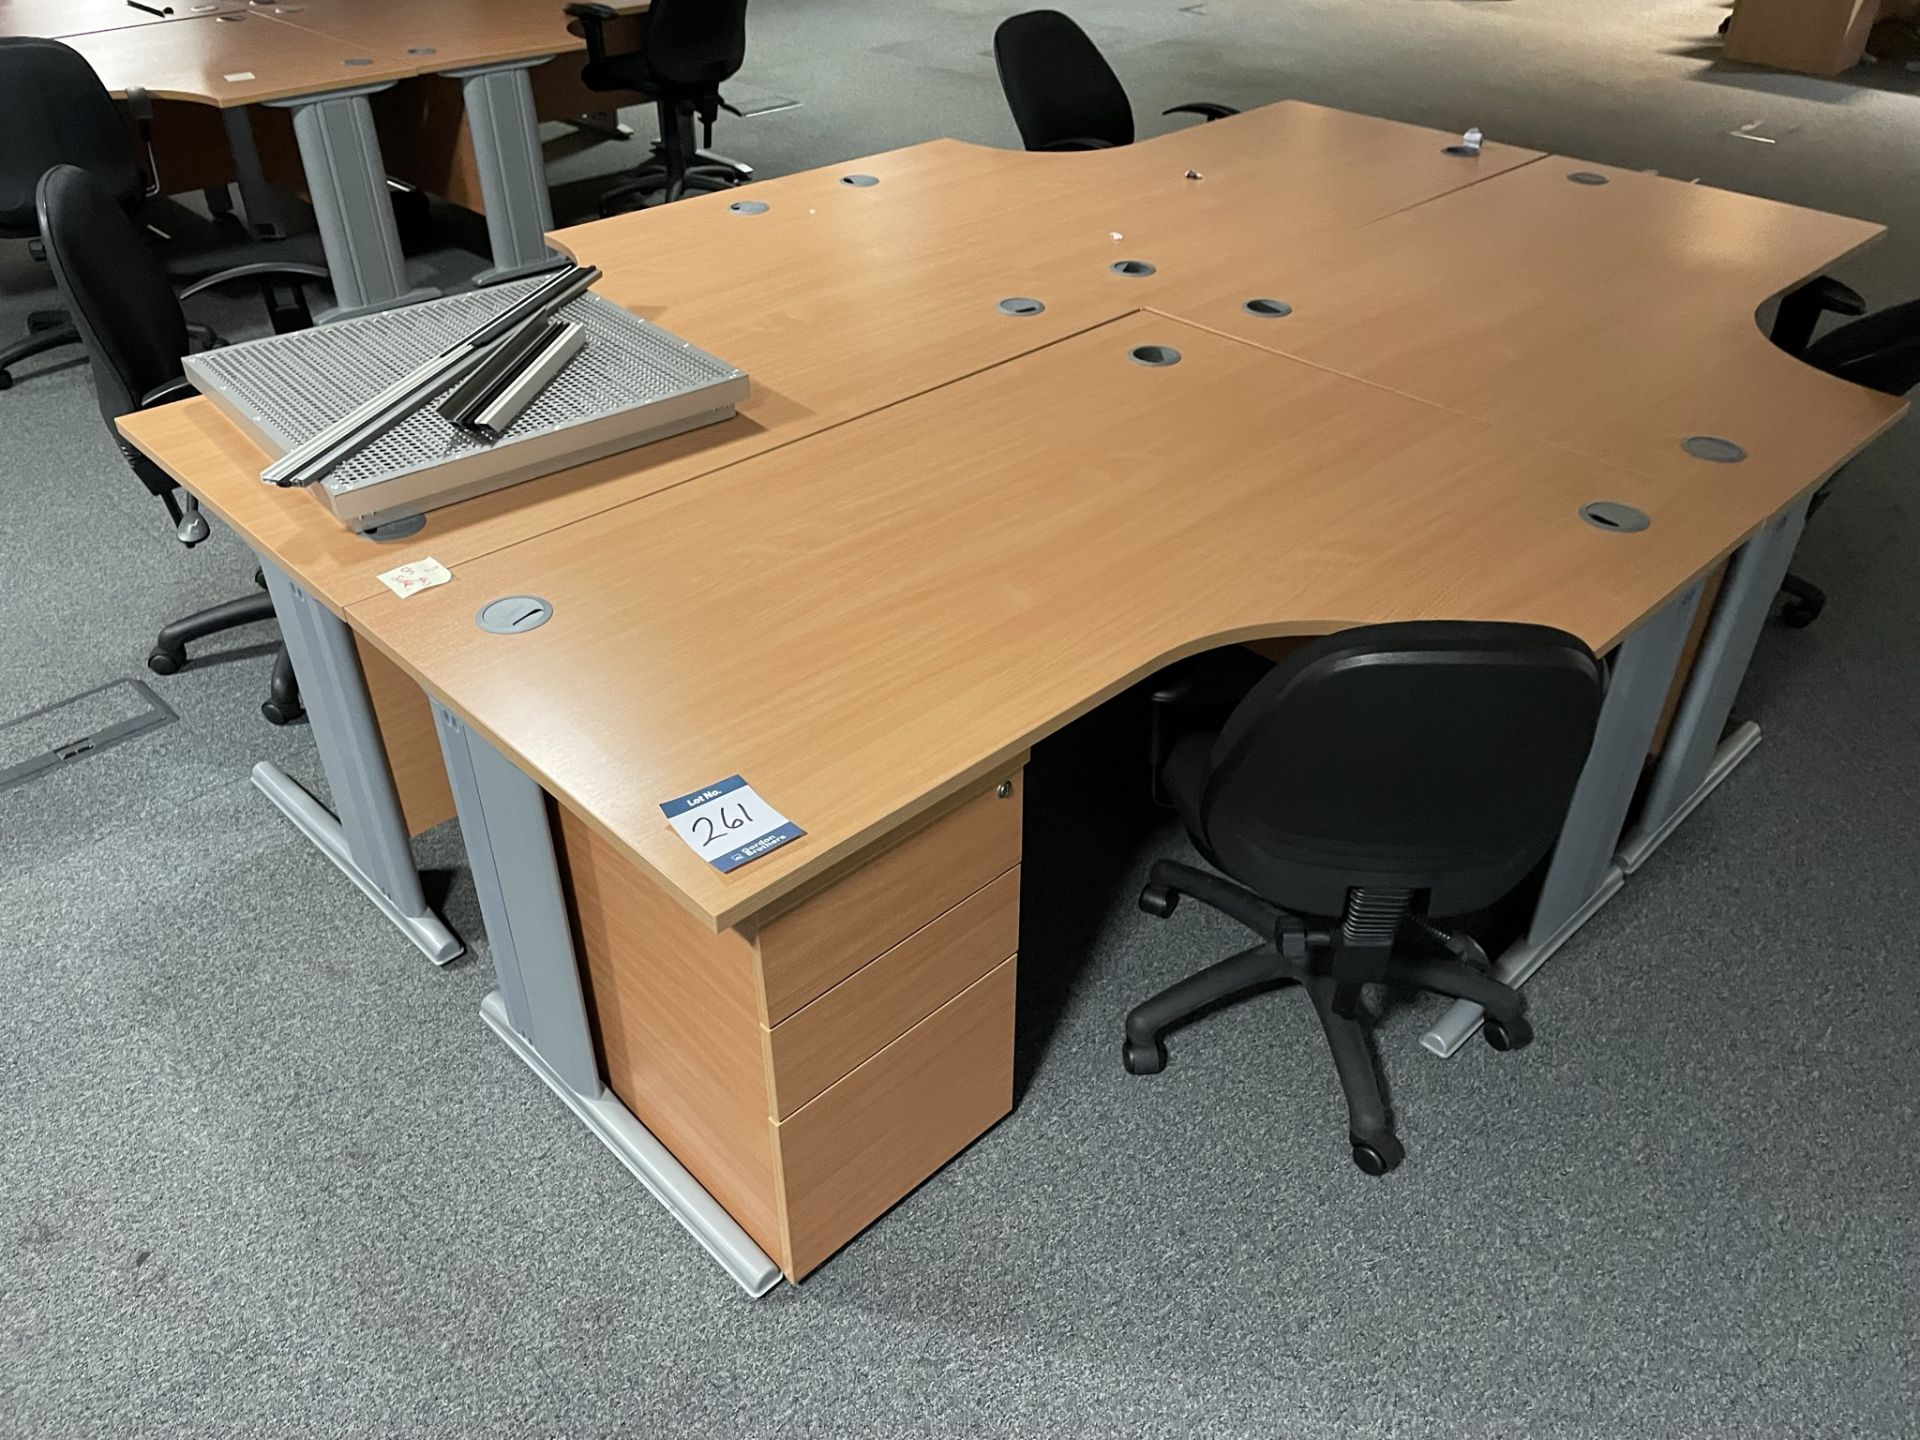 4x (no.) curved front light oak veneer desks, 4x (no.) operator chairs and 2x (no.) pedestals - Image 2 of 2